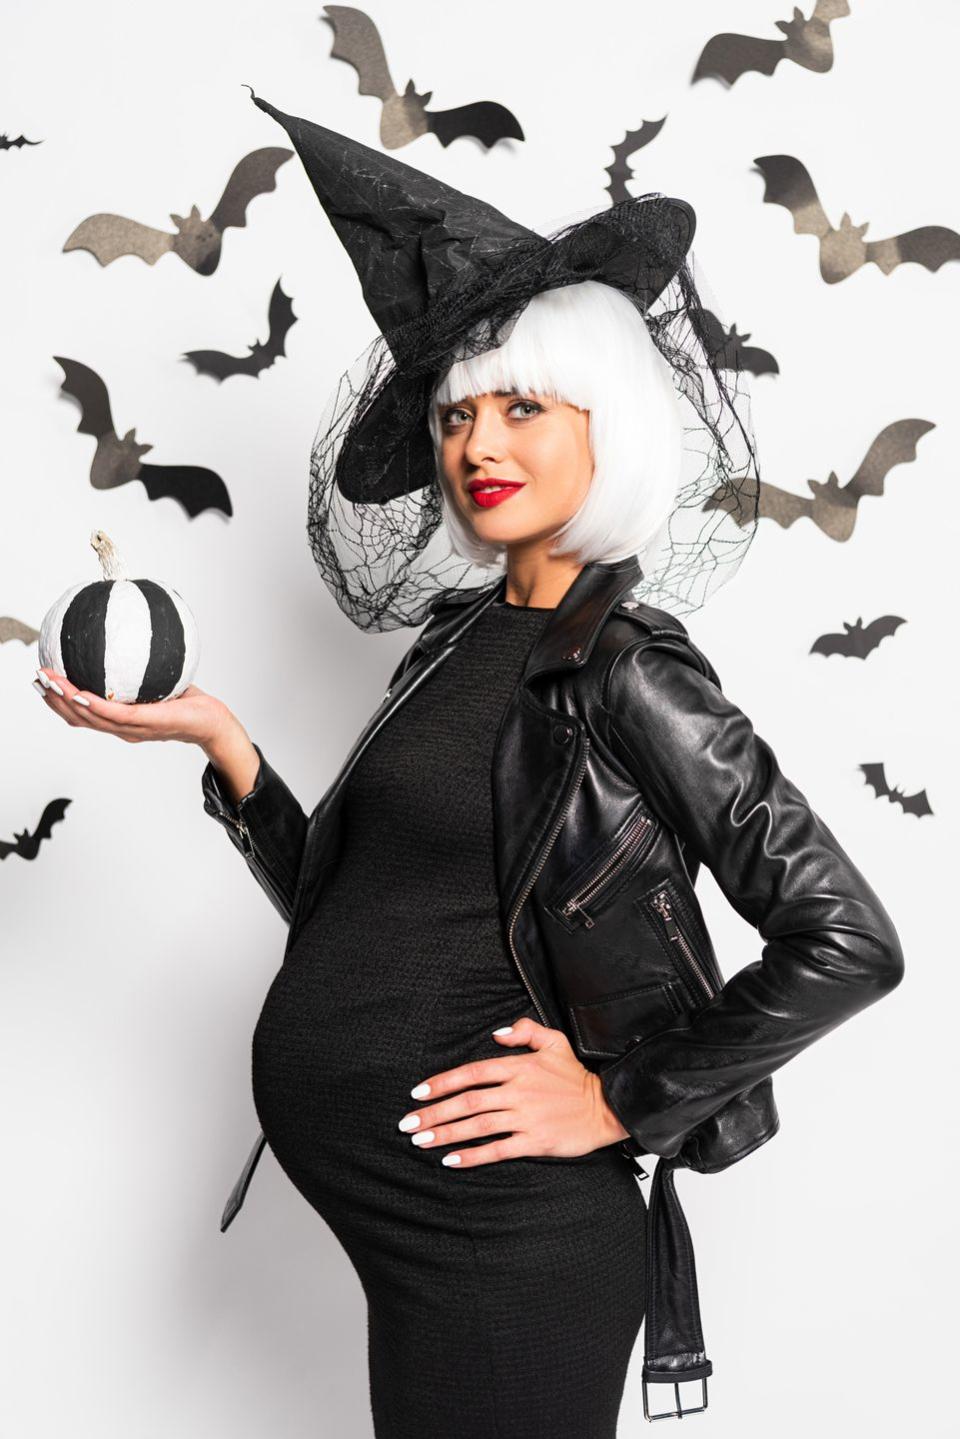 <p>You can't go wrong with a classic witch costume, especially if you're using your own comfortable <a href="https://www.amazon.com/Liu-Qu-Maternity-Sleeveless-Dresses/dp/B06XTDZLJ1/?tag=syn-yahoo-20&ascsubtag=%5Bartid%7C2140.g.41448343%5Bsrc%7Cyahoo-us" rel="nofollow noopener" target="_blank" data-ylk="slk:maternity clothes" class="link ">maternity clothes</a> as the base. Slip on your baby-friendly little black dress, plus a black <a href="https://www.amazon.com/Beistle-Satin-Soft-Black-Accessory-1-Count/dp/B000R4KNE2/?tag=syn-yahoo-20&ascsubtag=%5Bartid%7C2140.g.41448343%5Bsrc%7Cyahoo-us" rel="nofollow noopener" target="_blank" data-ylk="slk:witch's hat" class="link ">witch's hat</a>, and a wig for a spooky ensemble. If you feel like you have <em>nothing</em> to wear, we've got you covered. </p><p><a class="link " href="https://go.redirectingat.com?id=74968X1596630&url=https%3A%2F%2Fwww.walmart.com%2Fip%2FMaternity-Witch-Maternity-Costume-Maternity%2F14914296&sref=https%3A%2F%2Fwww.womenshealthmag.com%2Flife%2Fg41448343%2Fpregnant-halloween-costumes%2F" rel="nofollow noopener" target="_blank" data-ylk="slk:SHOP NOW">SHOP NOW</a></p>